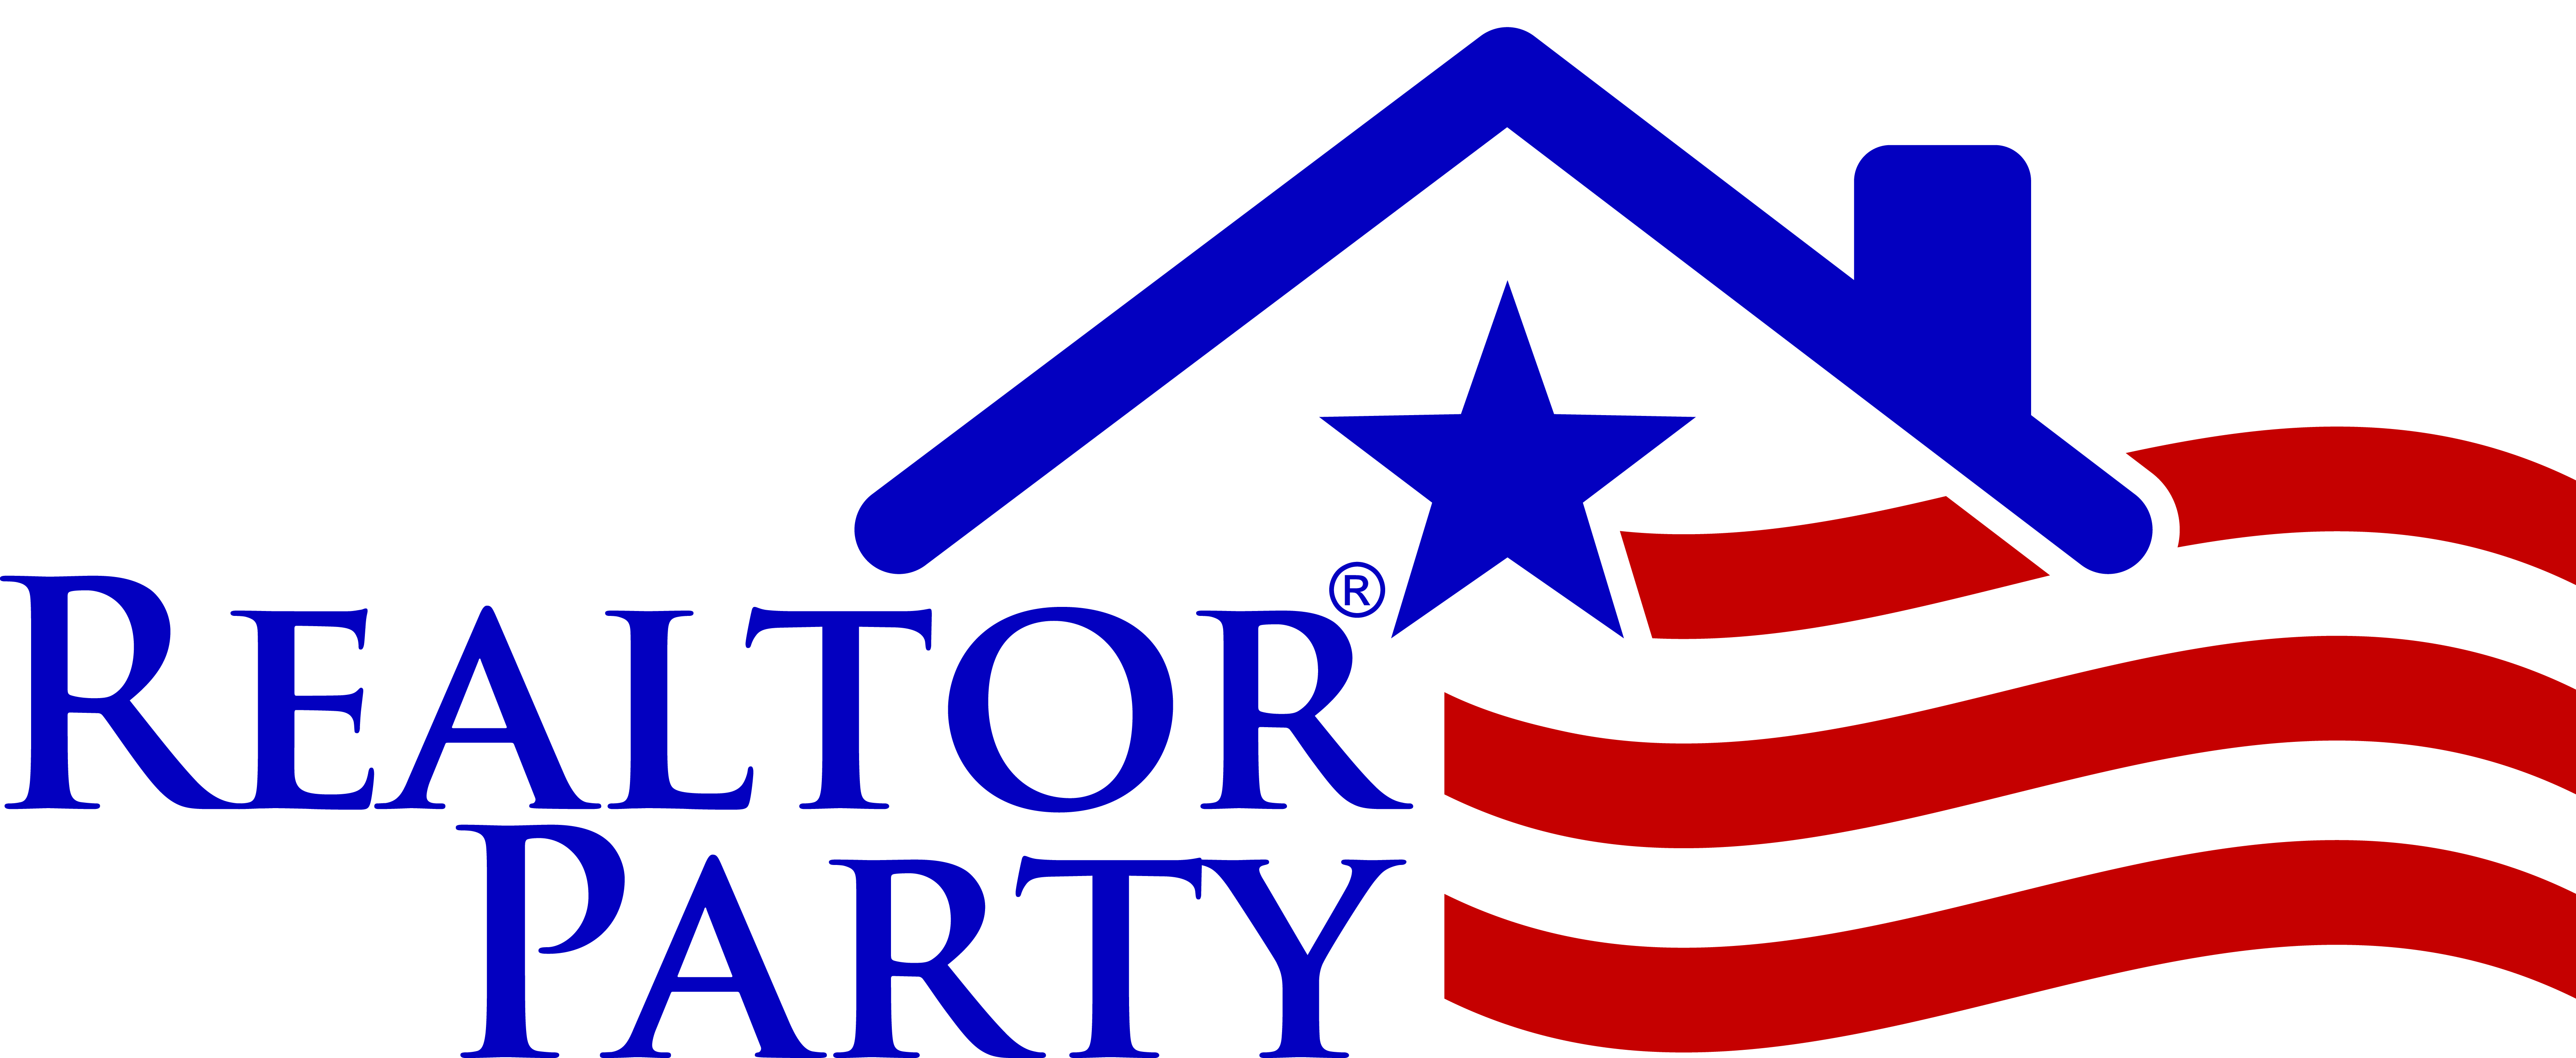 Realtor Party Graphics and Logos